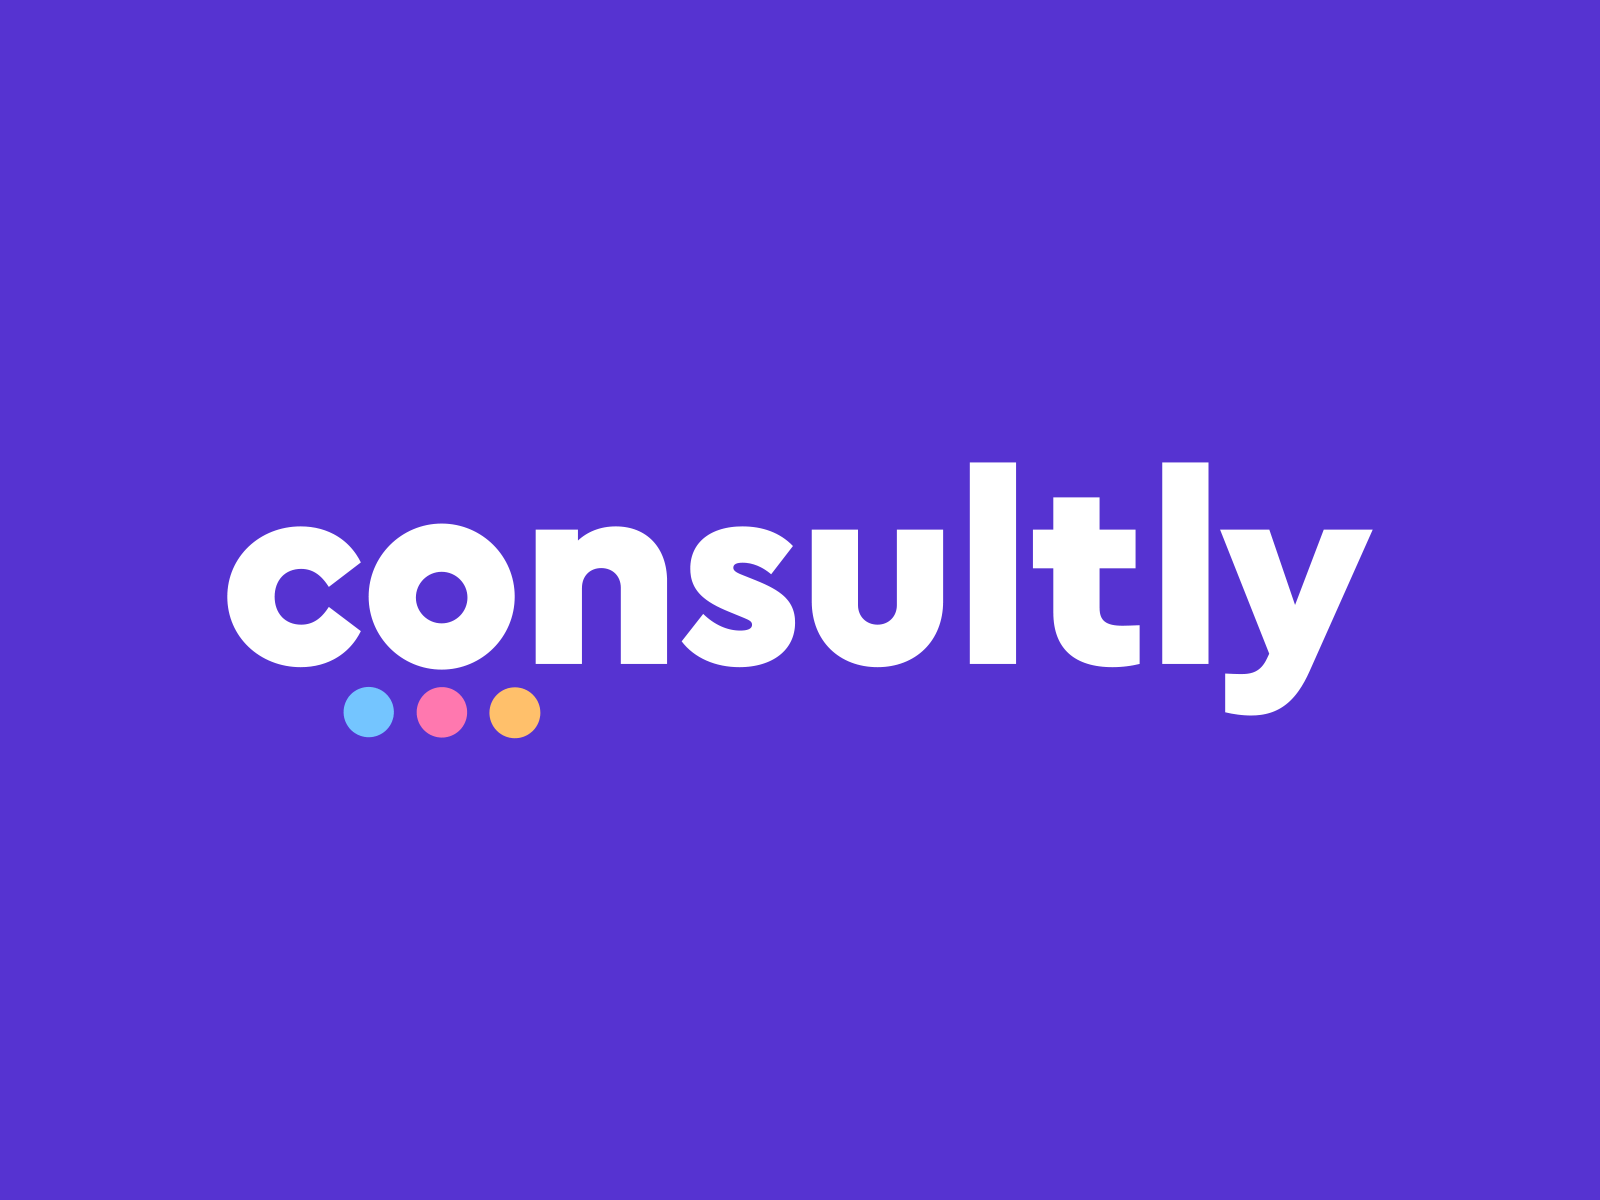 Consultly logo animation animation blockchain branding collaboration consult consulting crypto dots dynamic human icon logo management manager minimalist modern monogram technology wordmark workspace